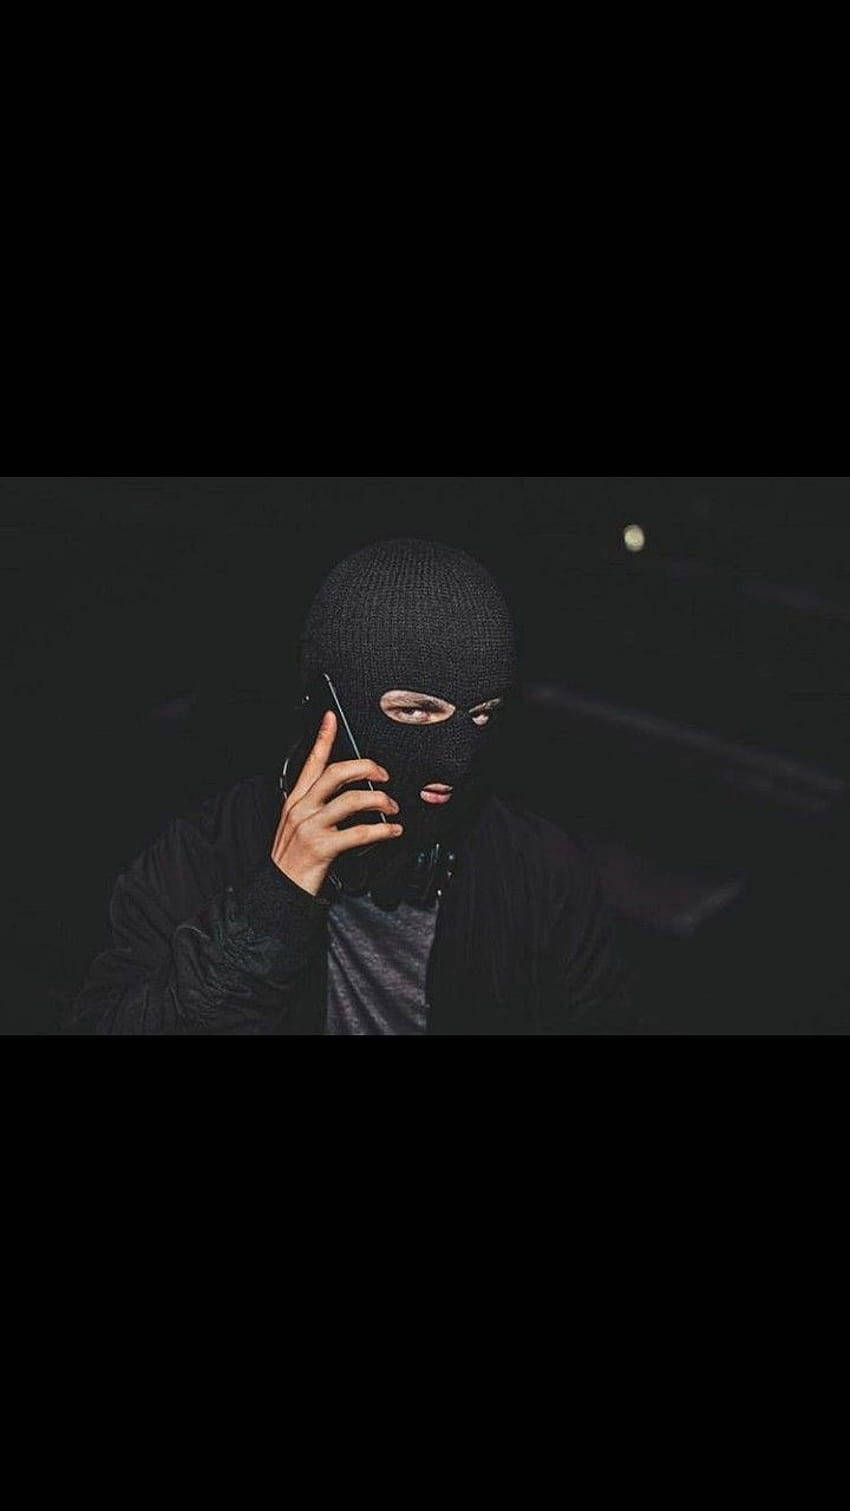 A black ski mask obscures the identity of the wearer. Wallpaper